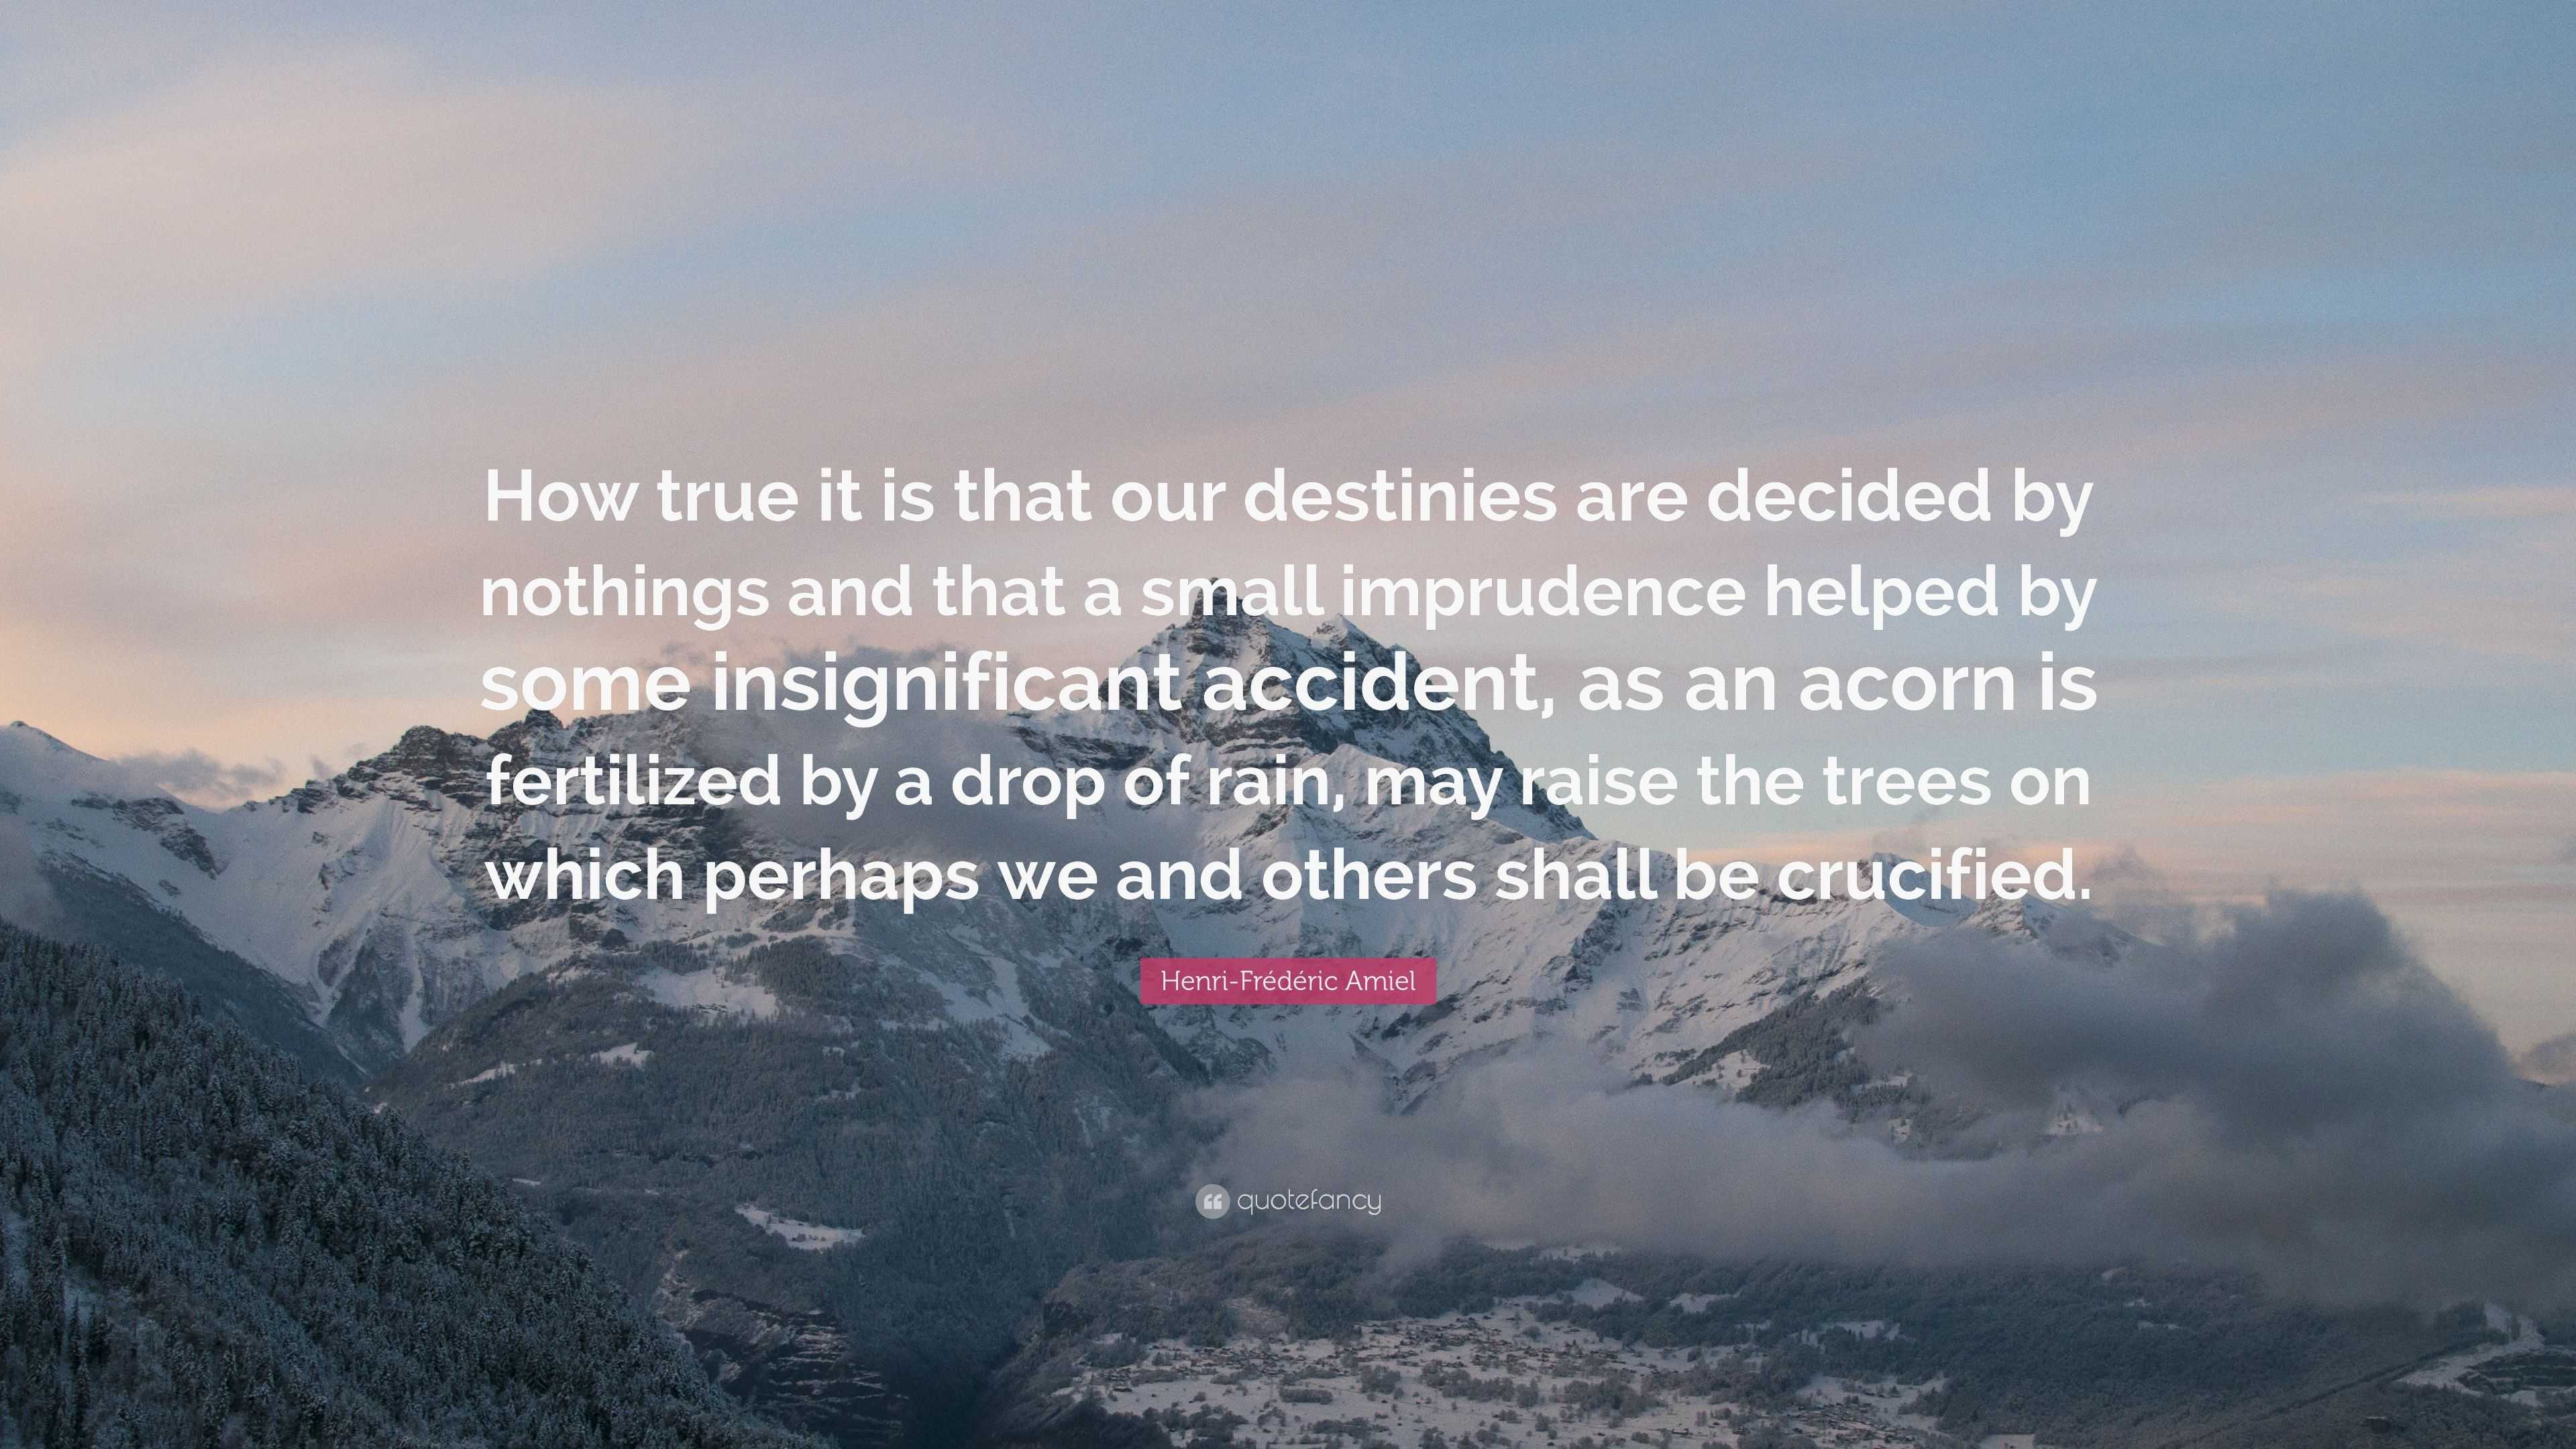 Henri-Frédéric Amiel Quote: “How true it is that our destinies are ...